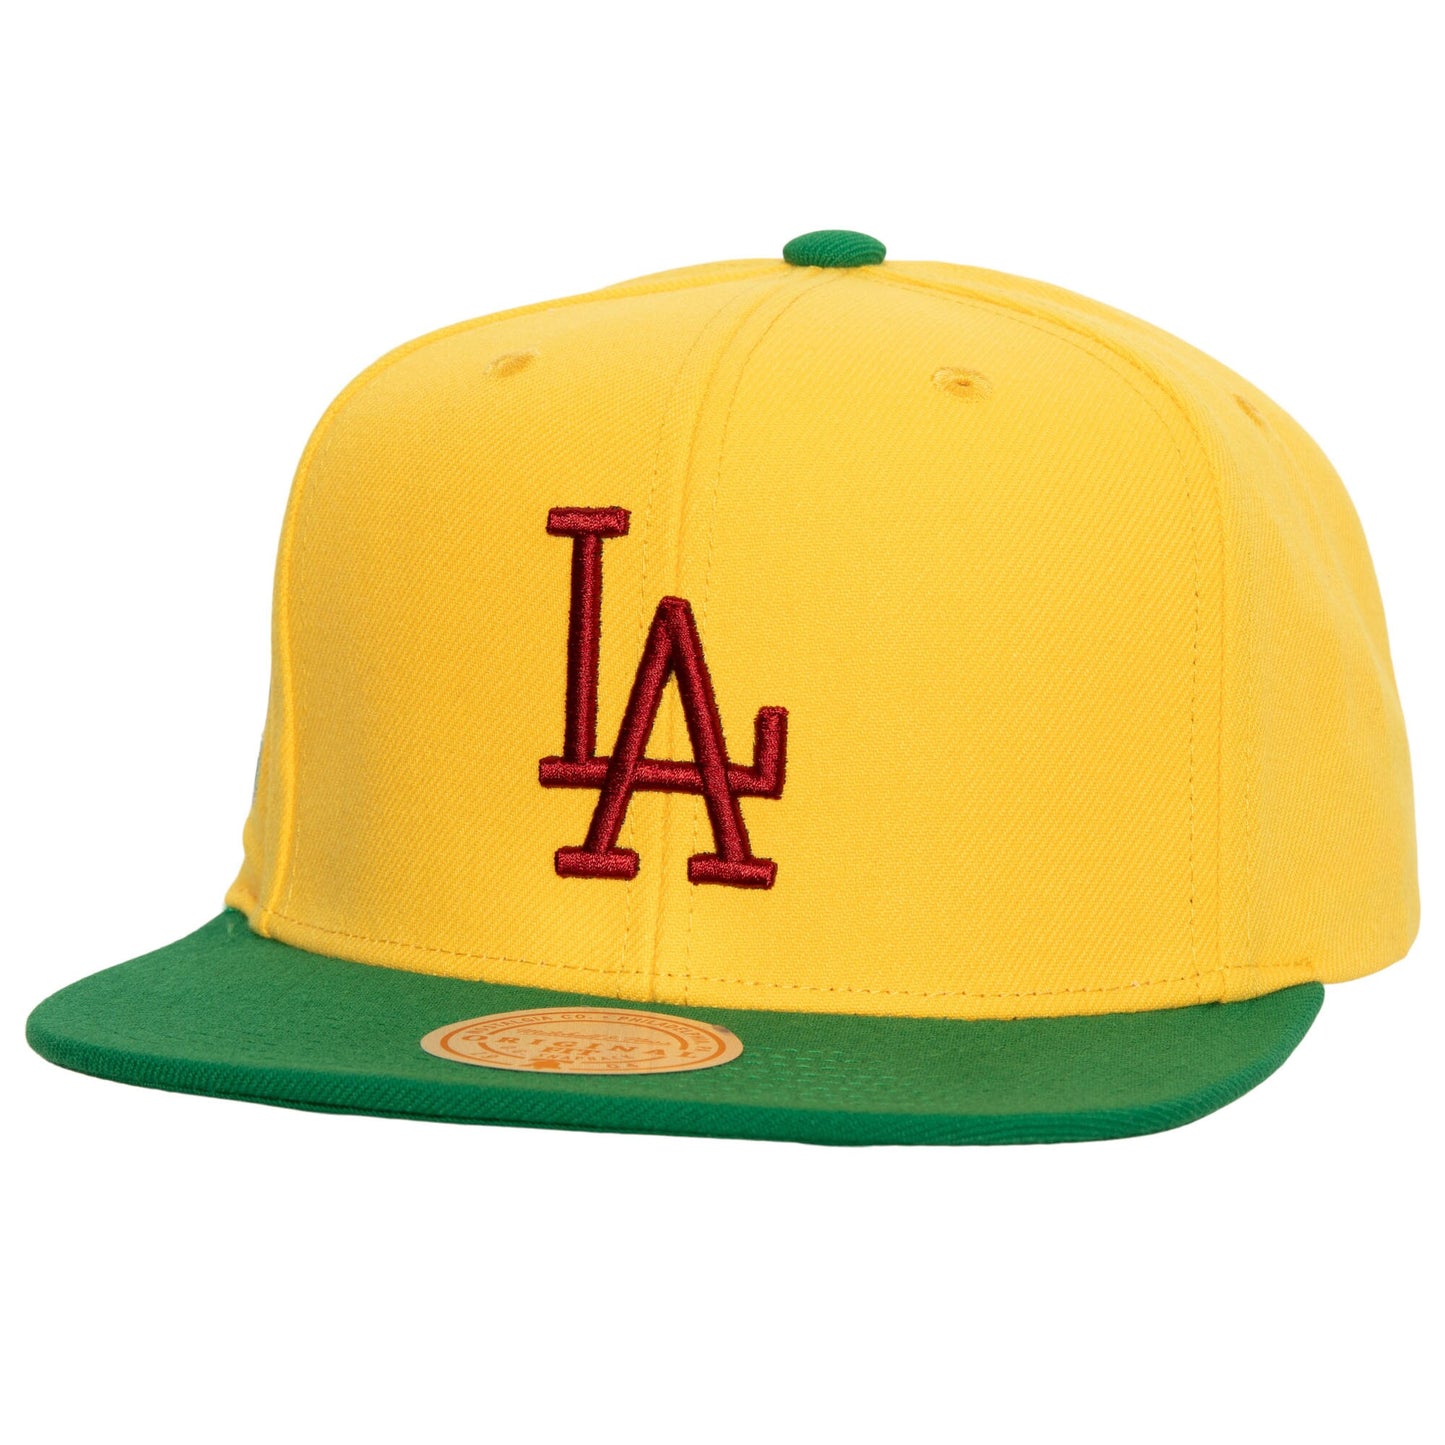 Los Angeles Dodgers Mitchell & Ness Hometown Snapback Hat - Yellow/Green